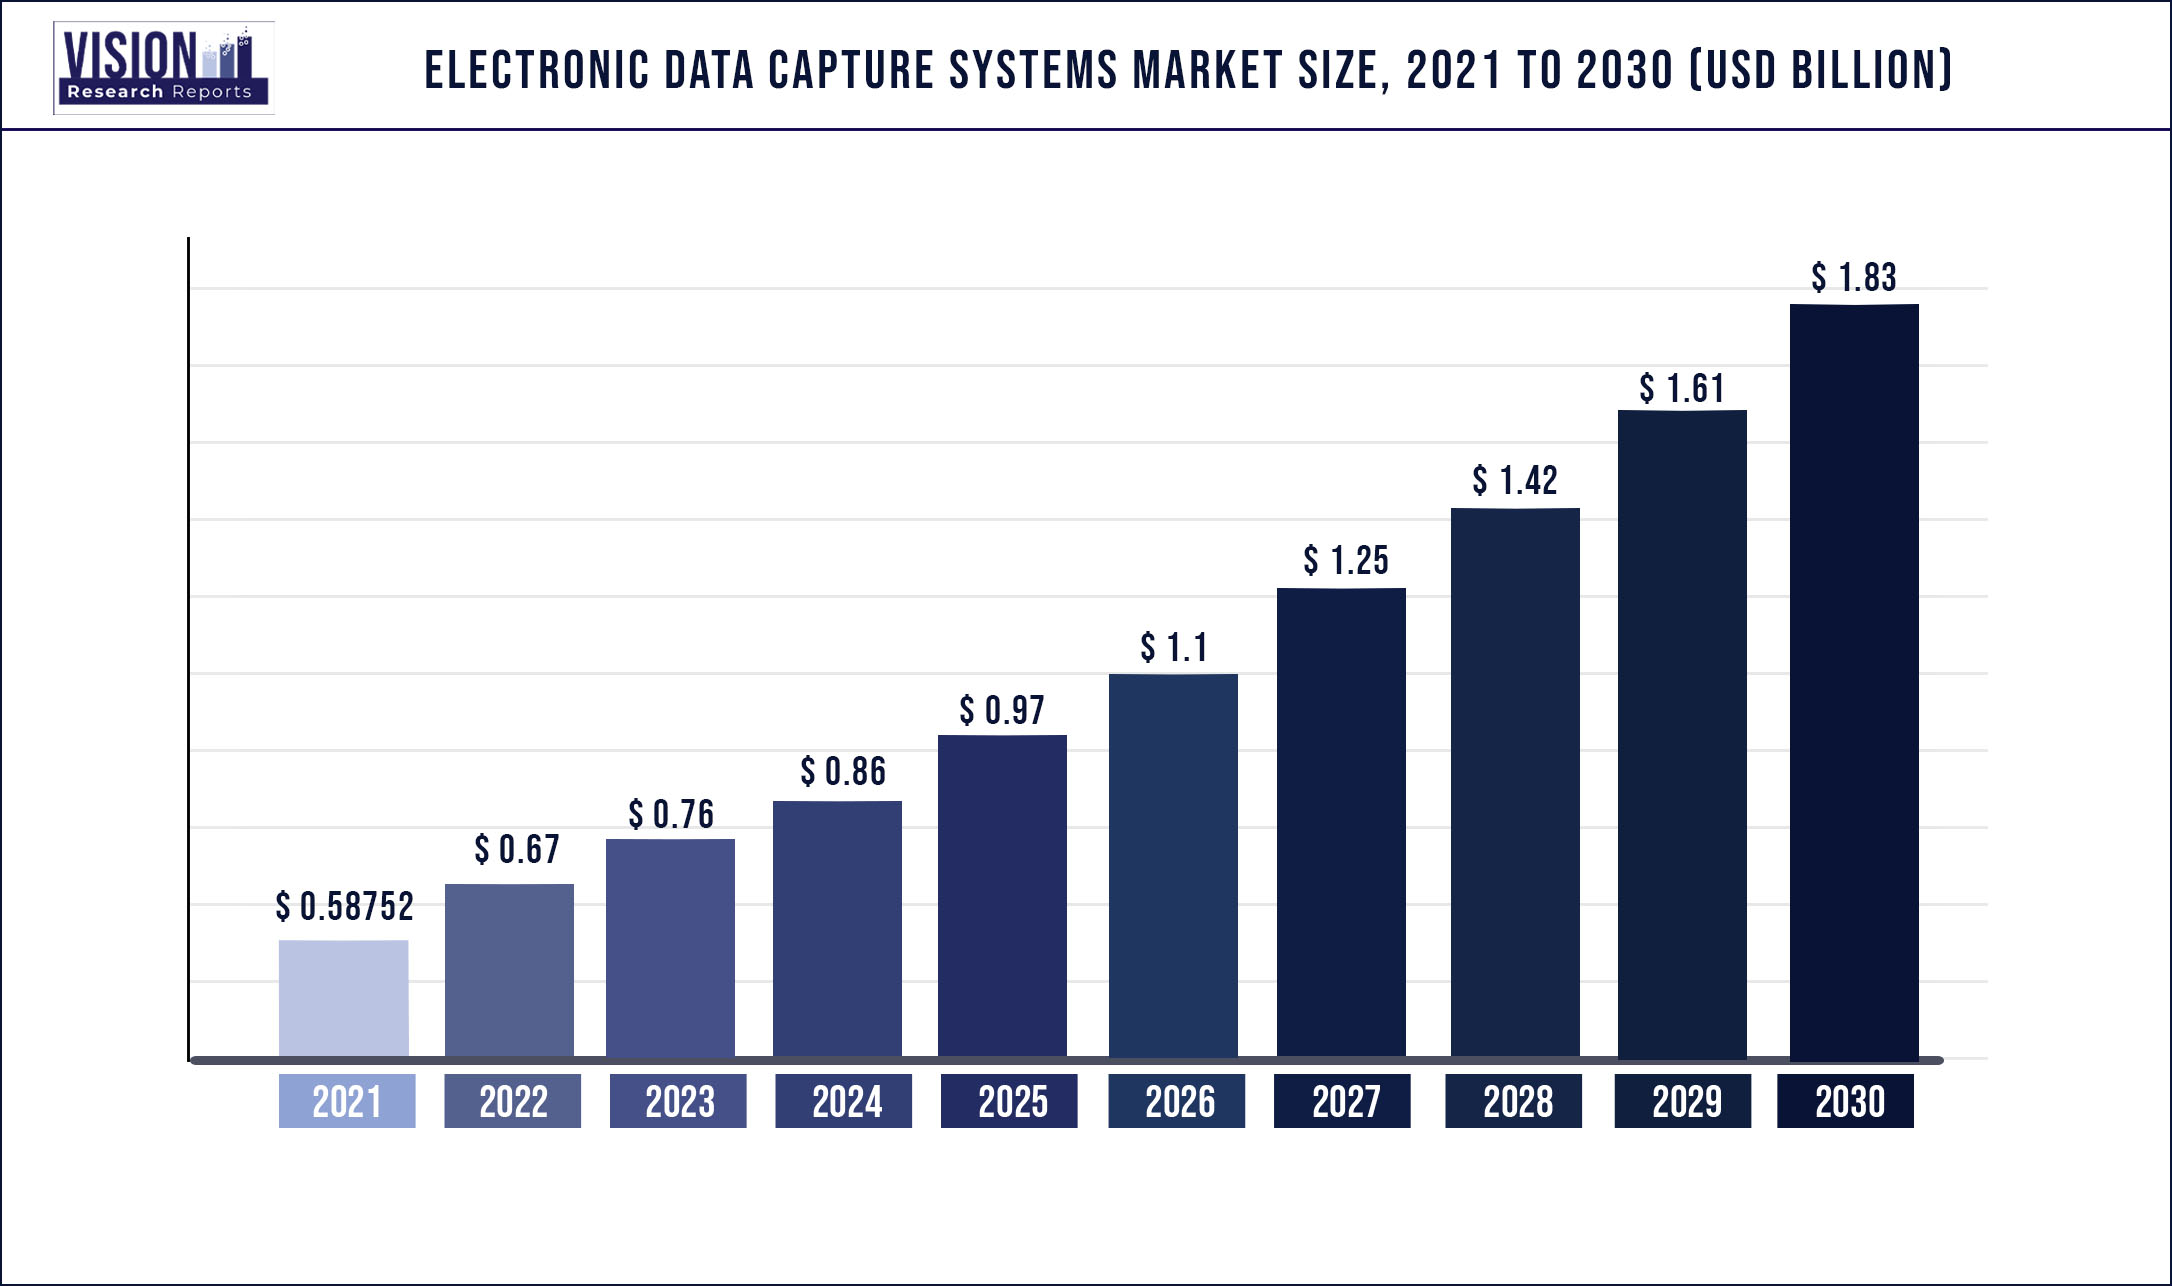 Electronic Data Capture Systems Market Size 2021 to 2030